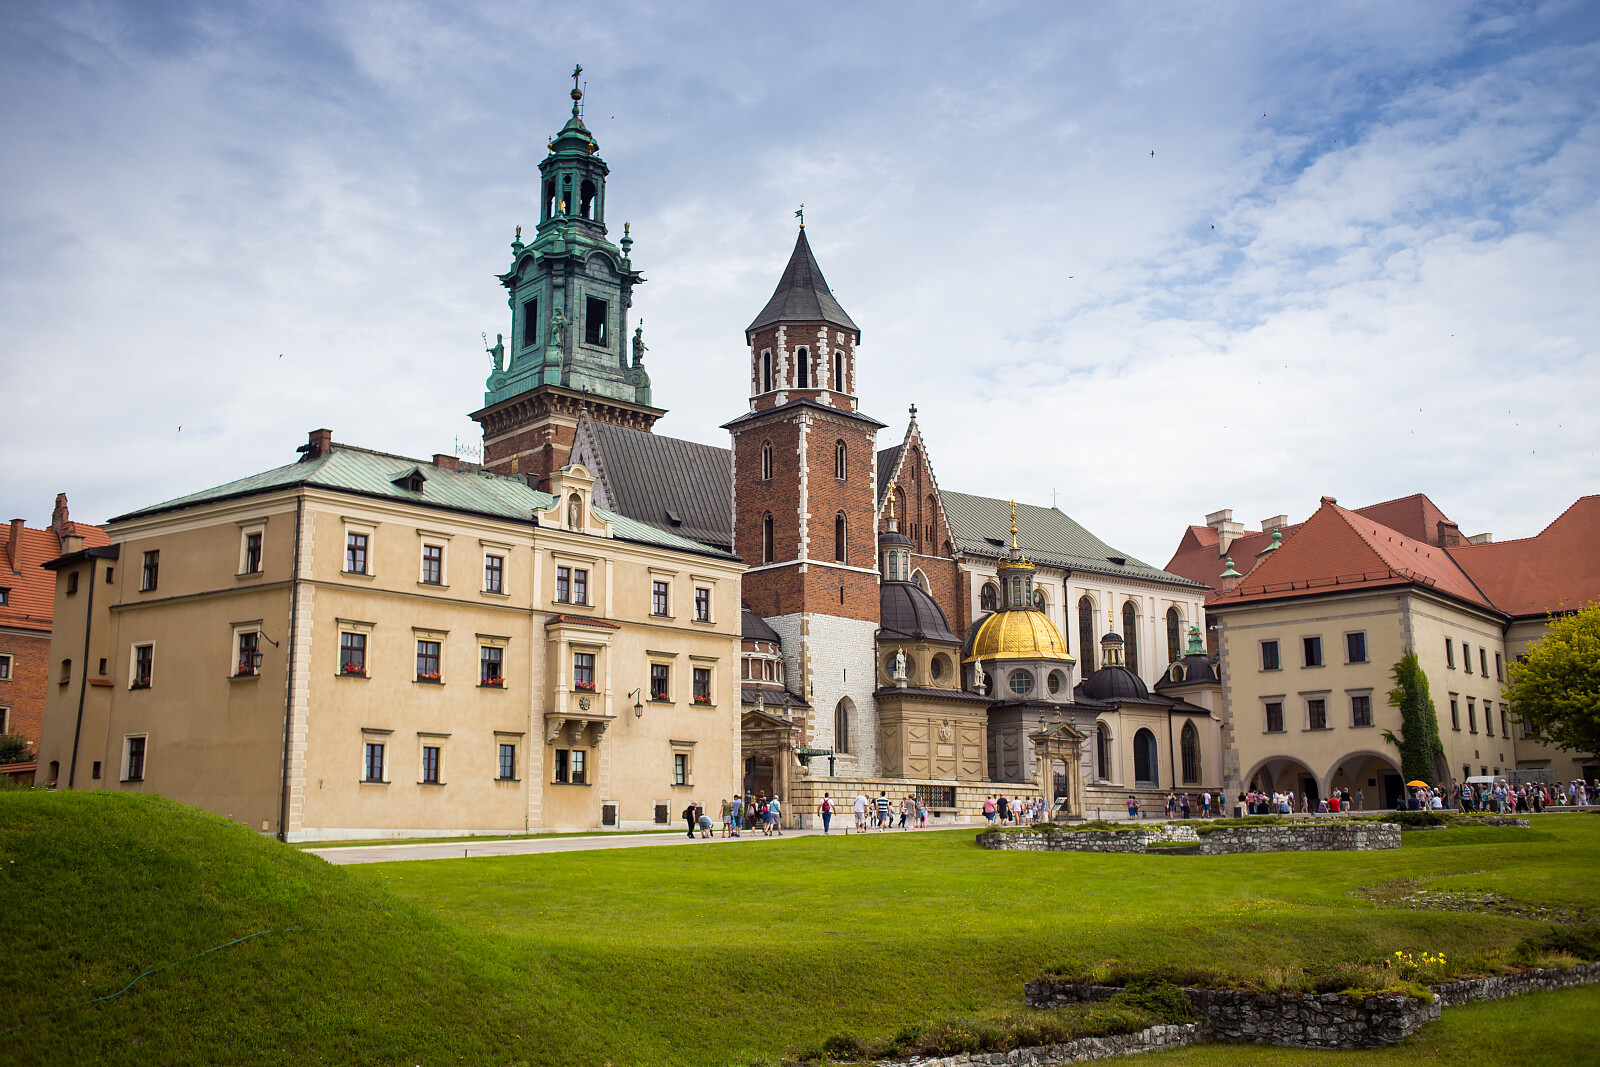 10-july-2017krakow-wawel-castle-daywawel-hill-with-cathedral-castlewawel-castle-complex-krakow-polandhistoric-center-city-with-ancient-architecture.jpg [9.72 MB]